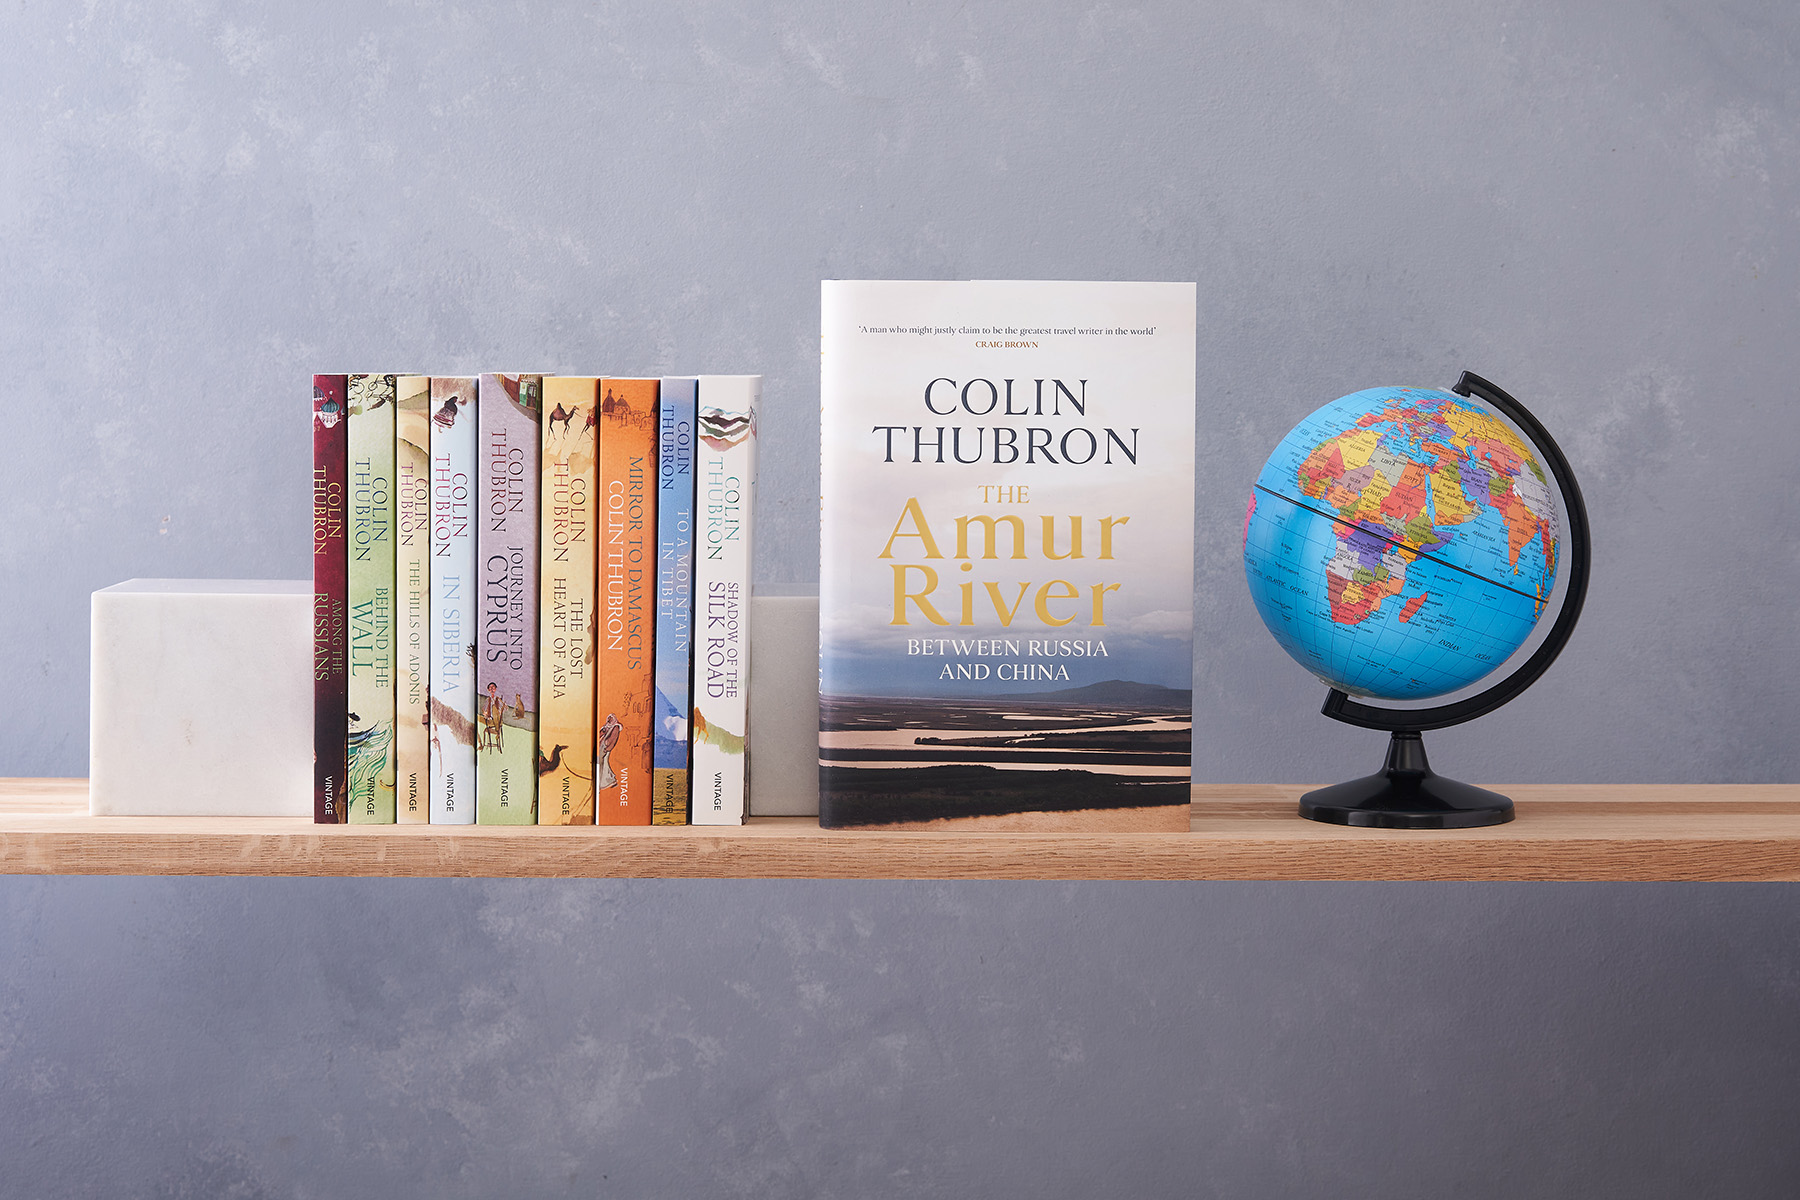 Colin Thubron's travel writing books standing upright on a shelf to show spines, with The Amur River turned to display its cover, alongside a small globe.